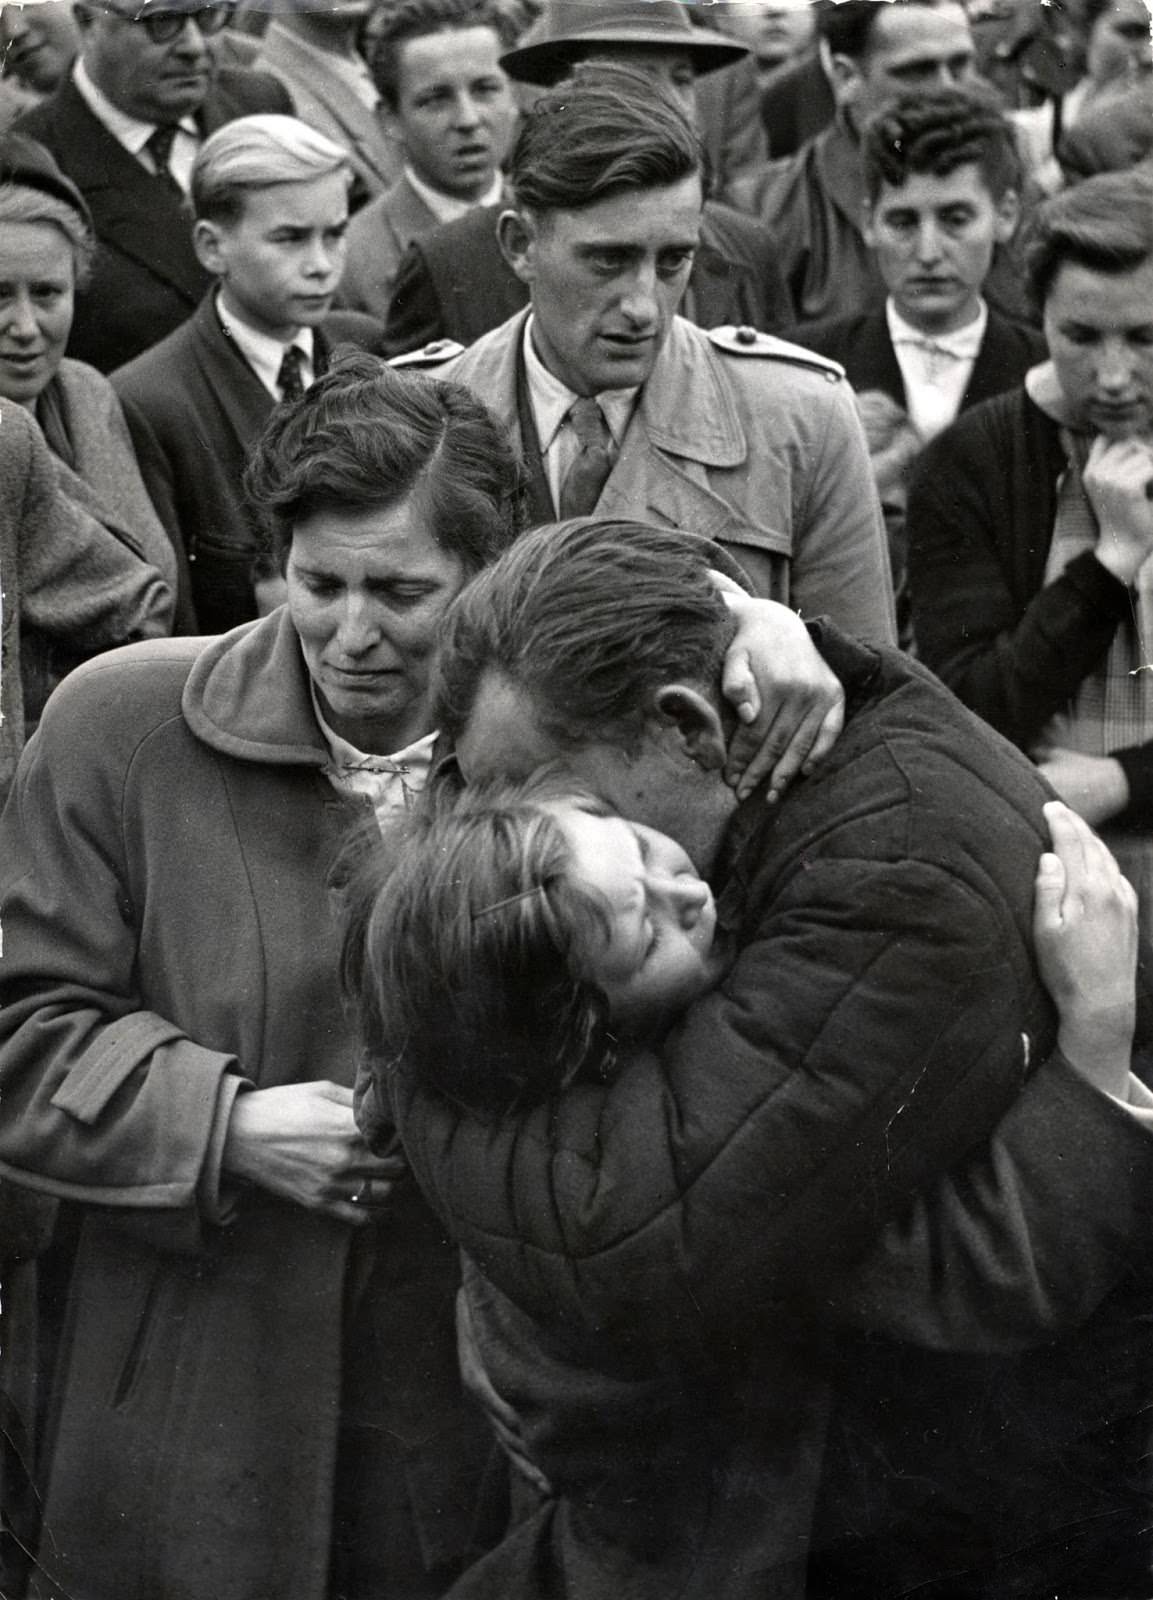 A German WWII Prisoner Meets His Daughter for the First Time Since She Was Just a Year Old in 1956